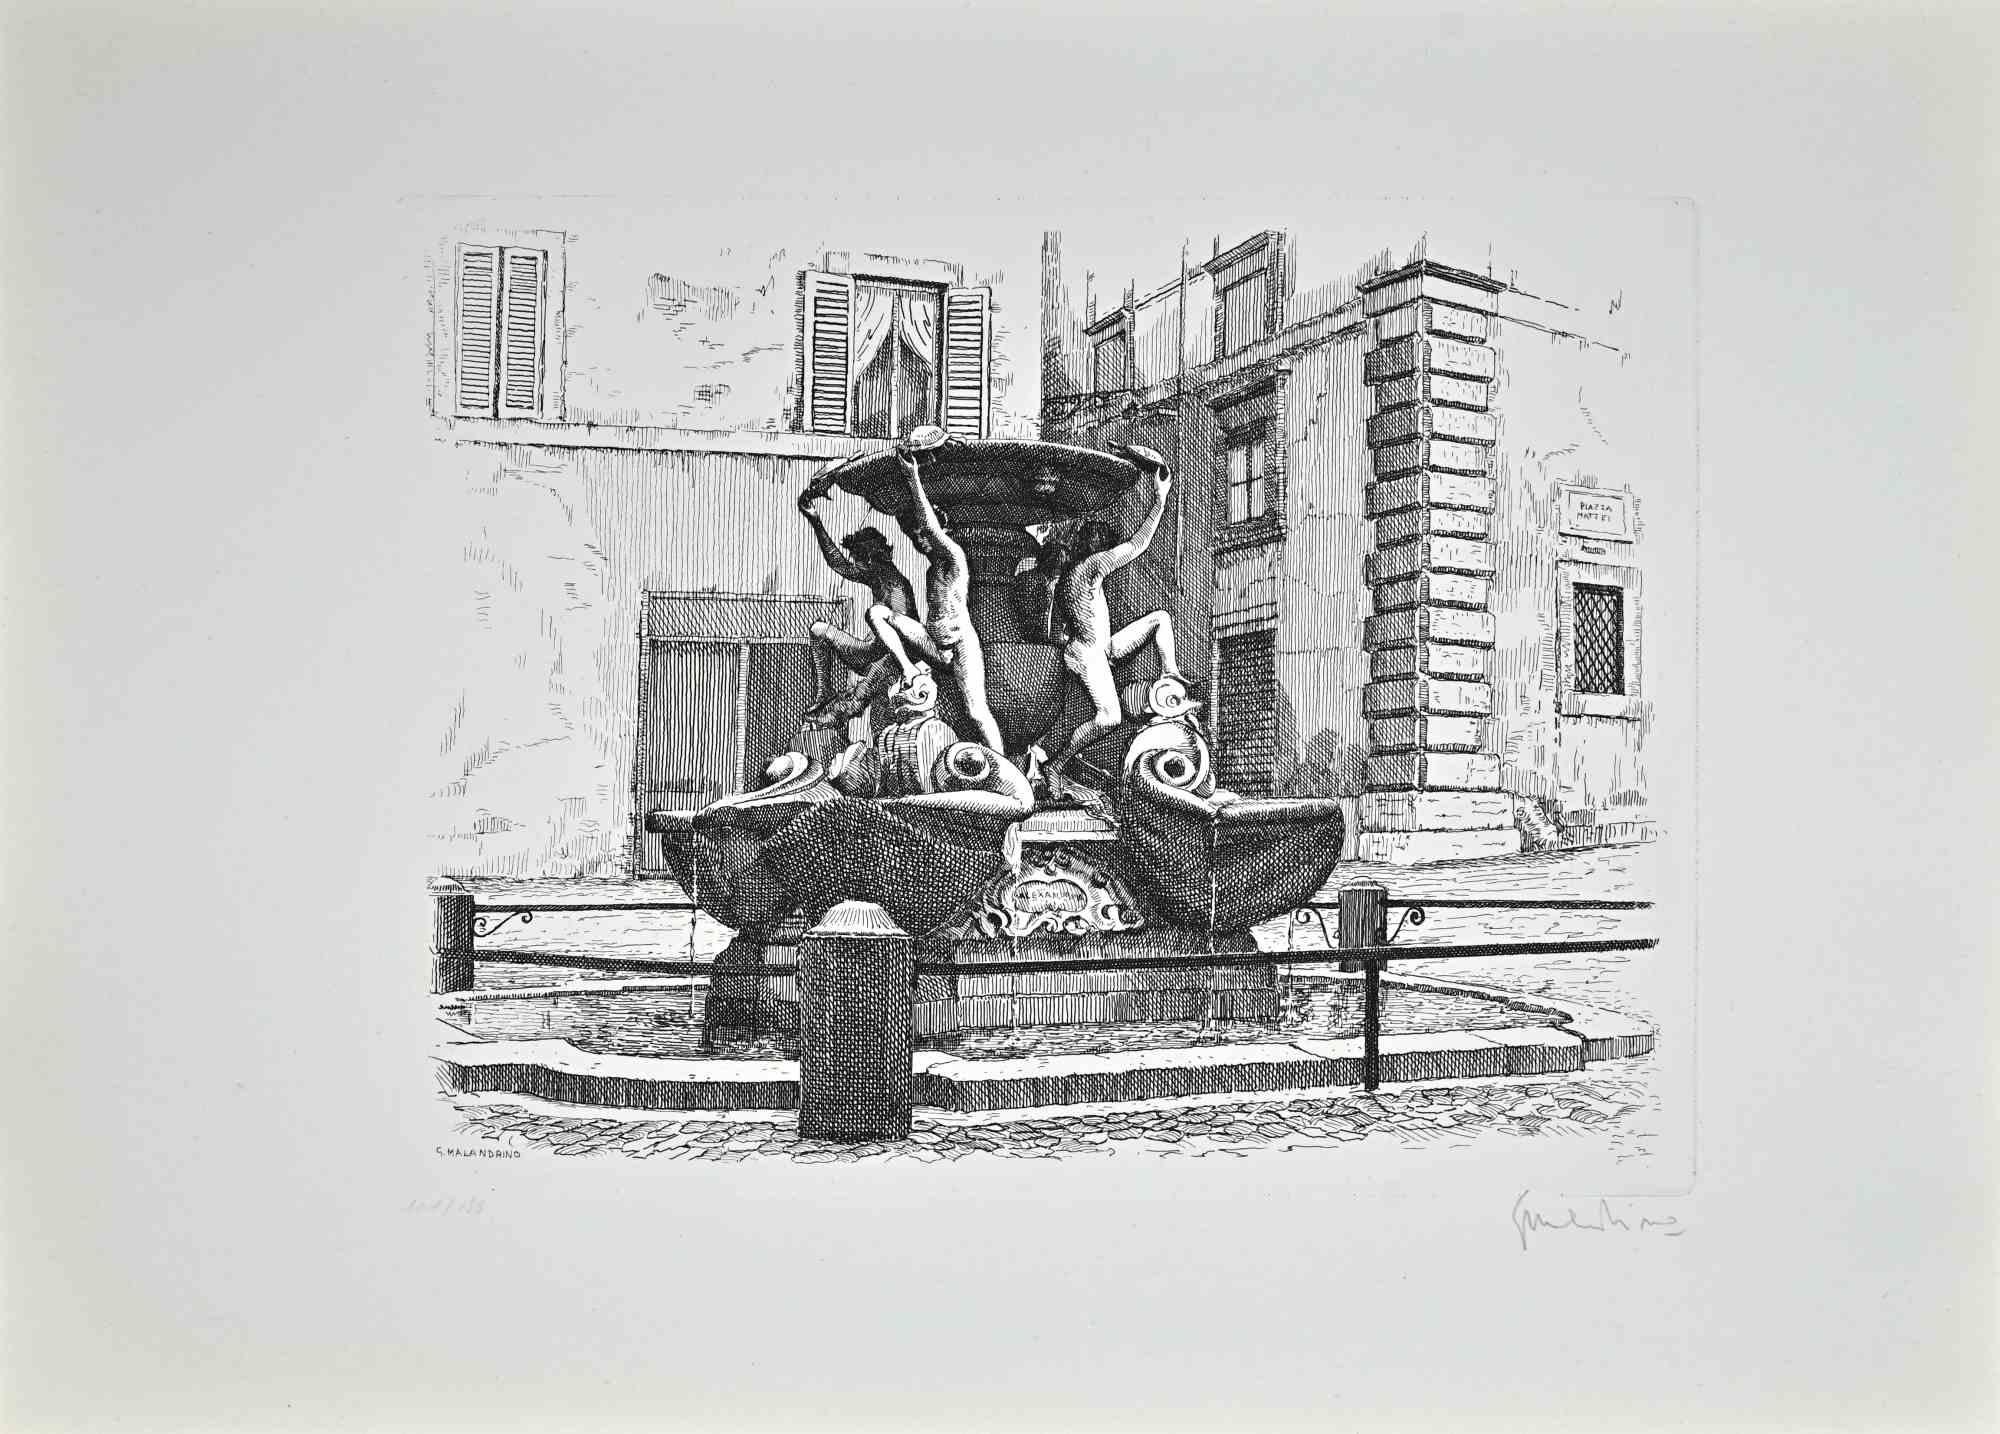 Fountain of the Turtles - Etching by Giuseppe Malandrino - 1970